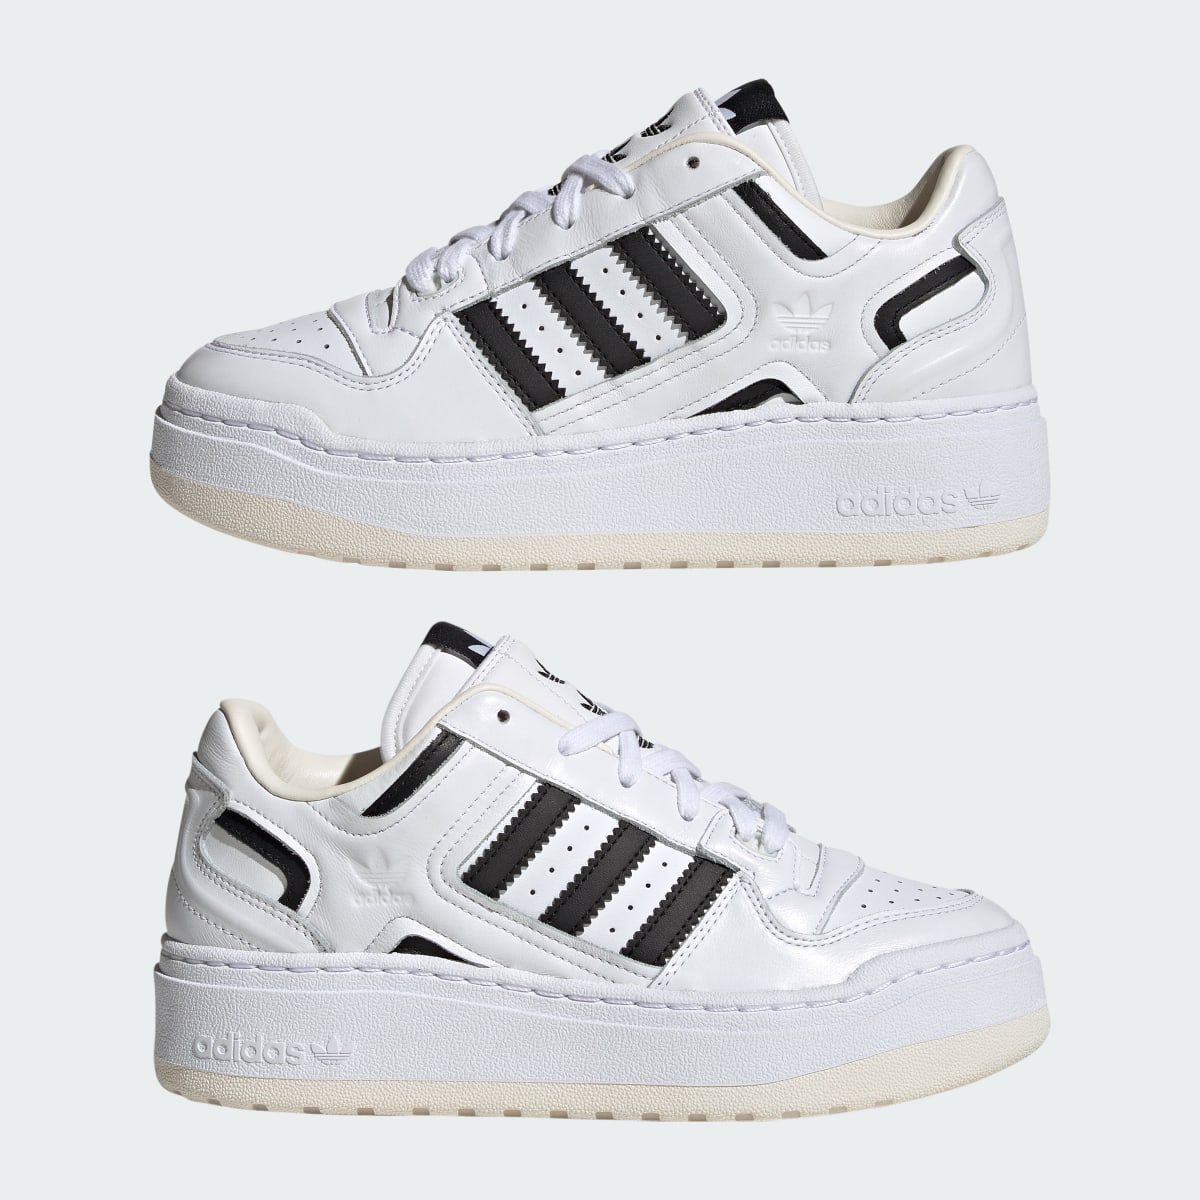 Adidas Chaussure Forum XLG. 8